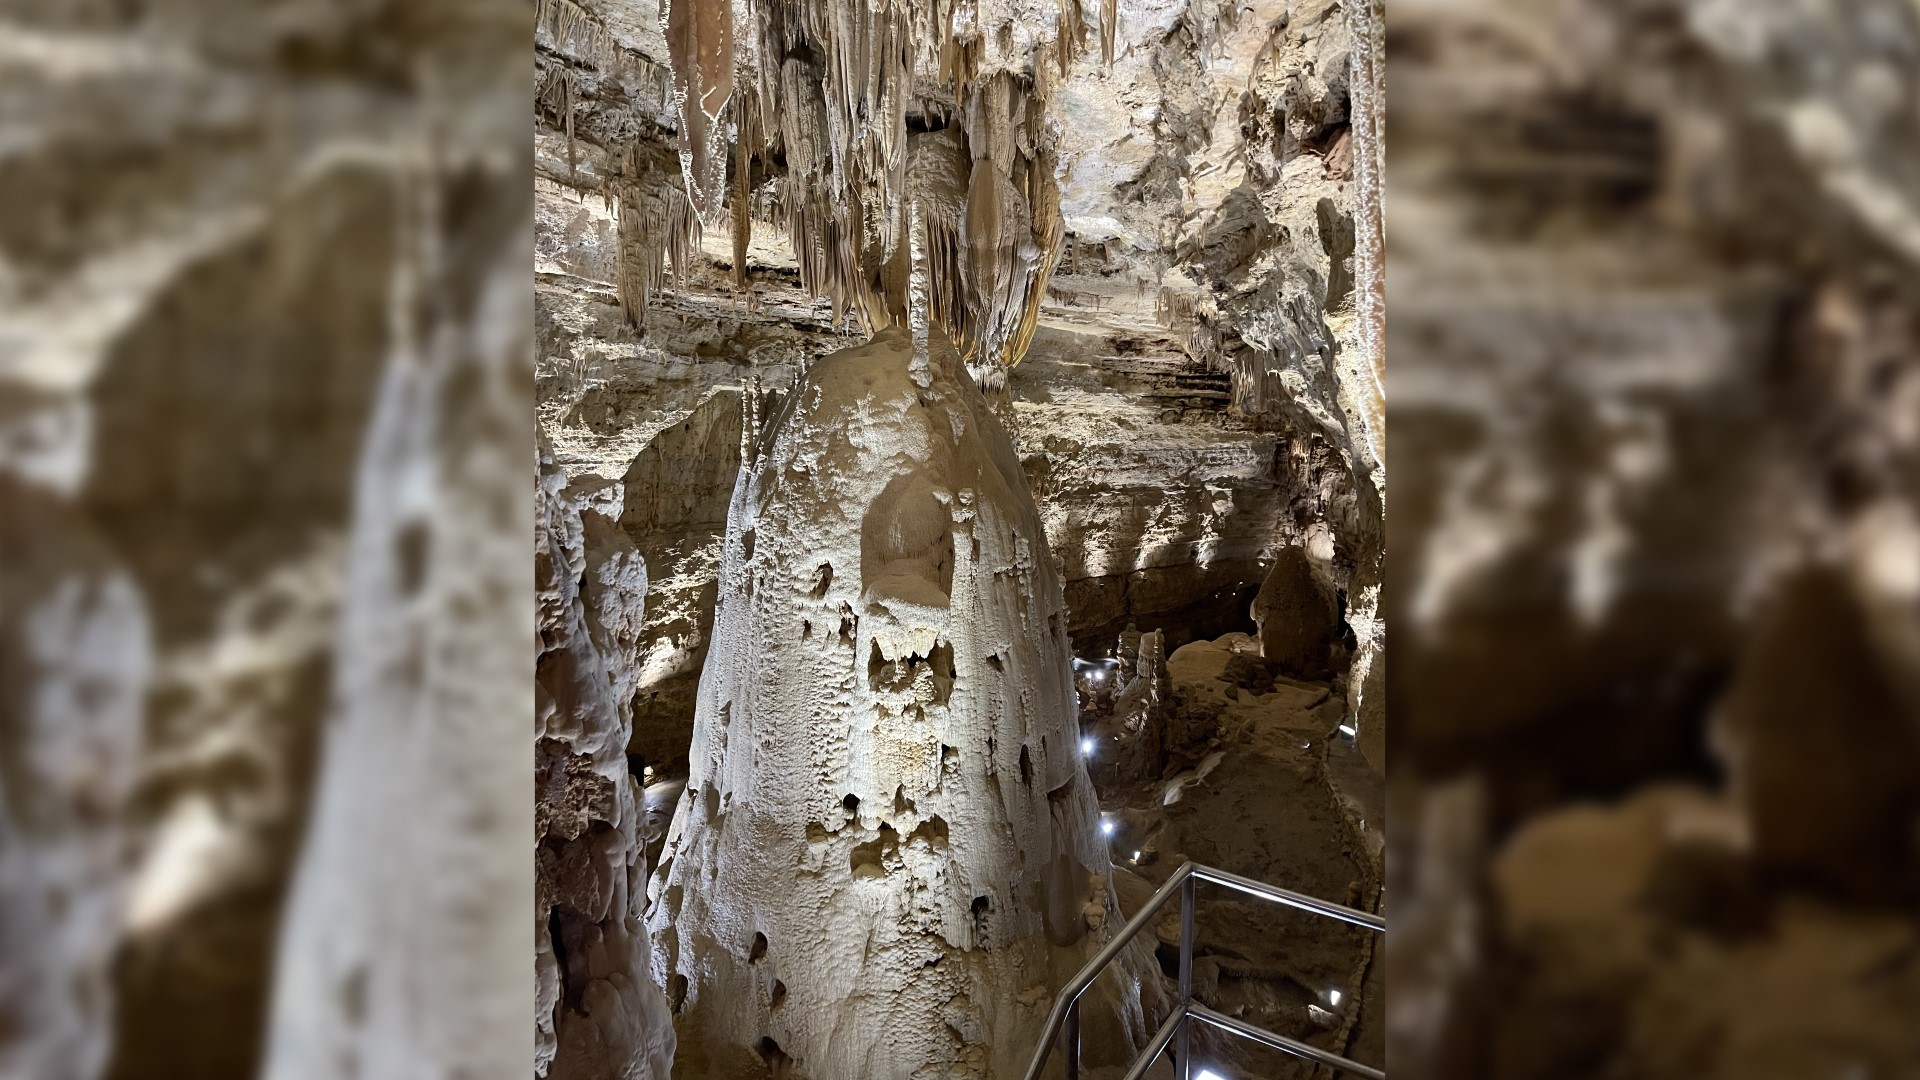 Even though Natural Bridge Caverns has been around for several decades, new parts of cave still being discovered.